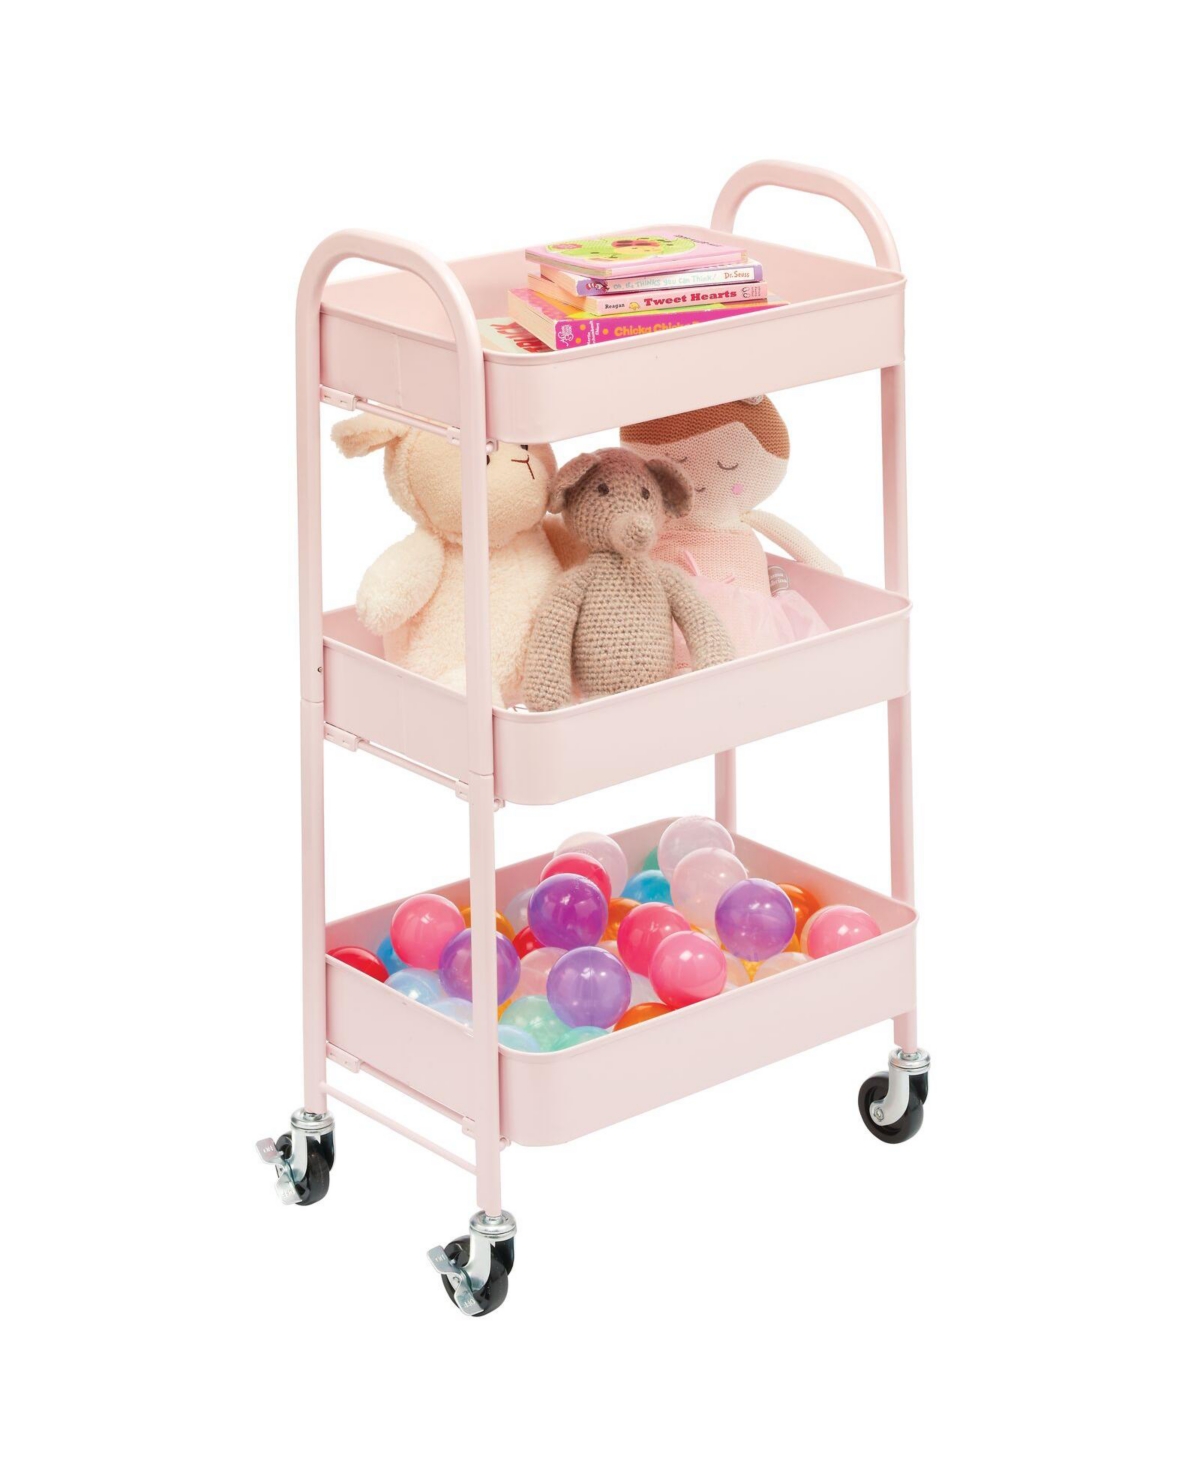 Metal 3-Tier Rolling Utility Storage Carts, 4 Caster Wheels - Light pink